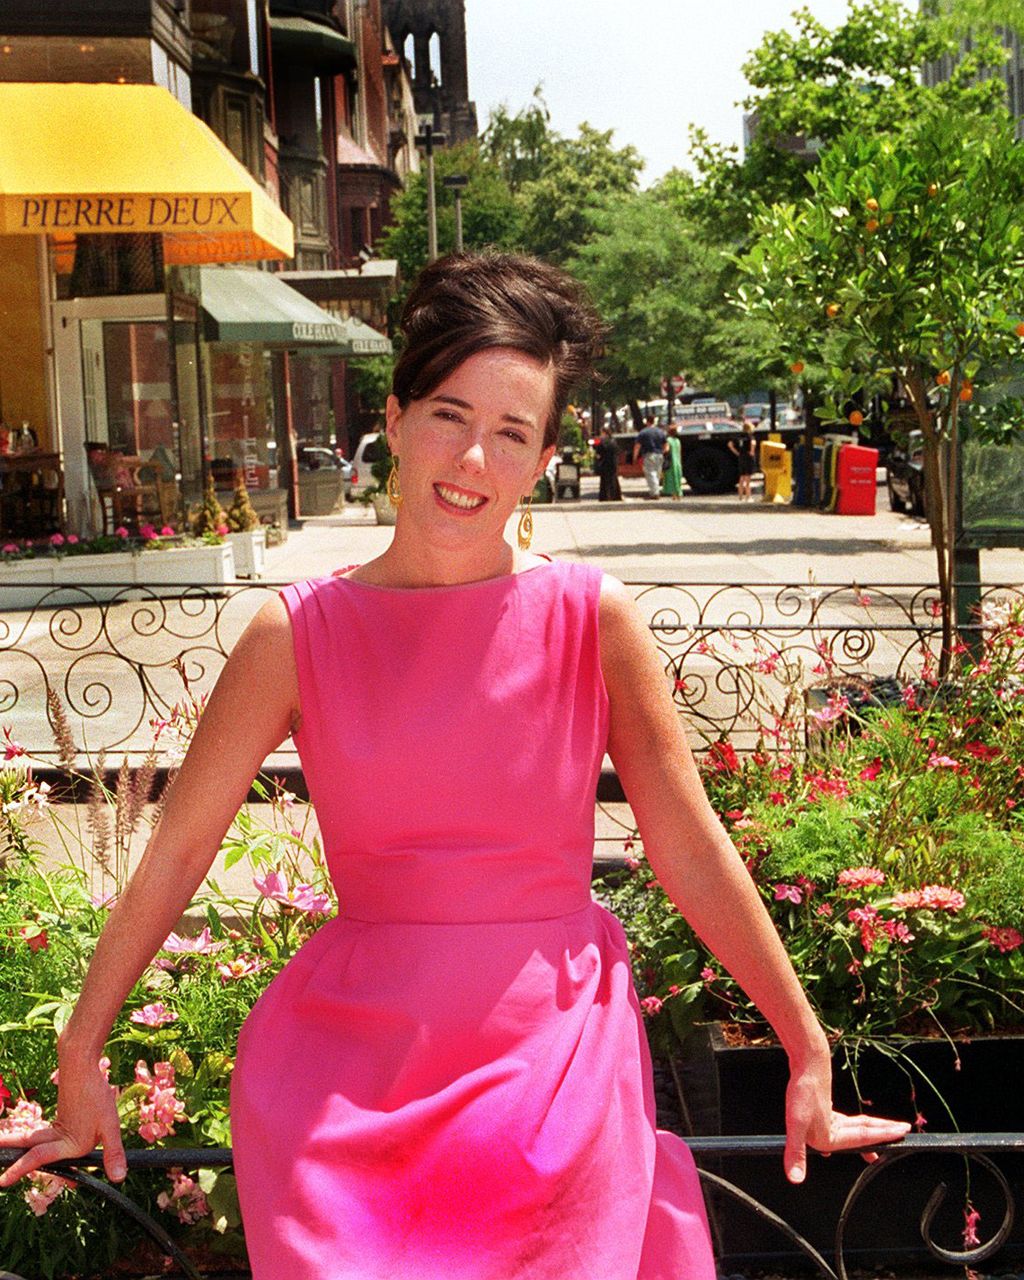 Kate Spade's Exuberant Life Remembered by Fashion Friends